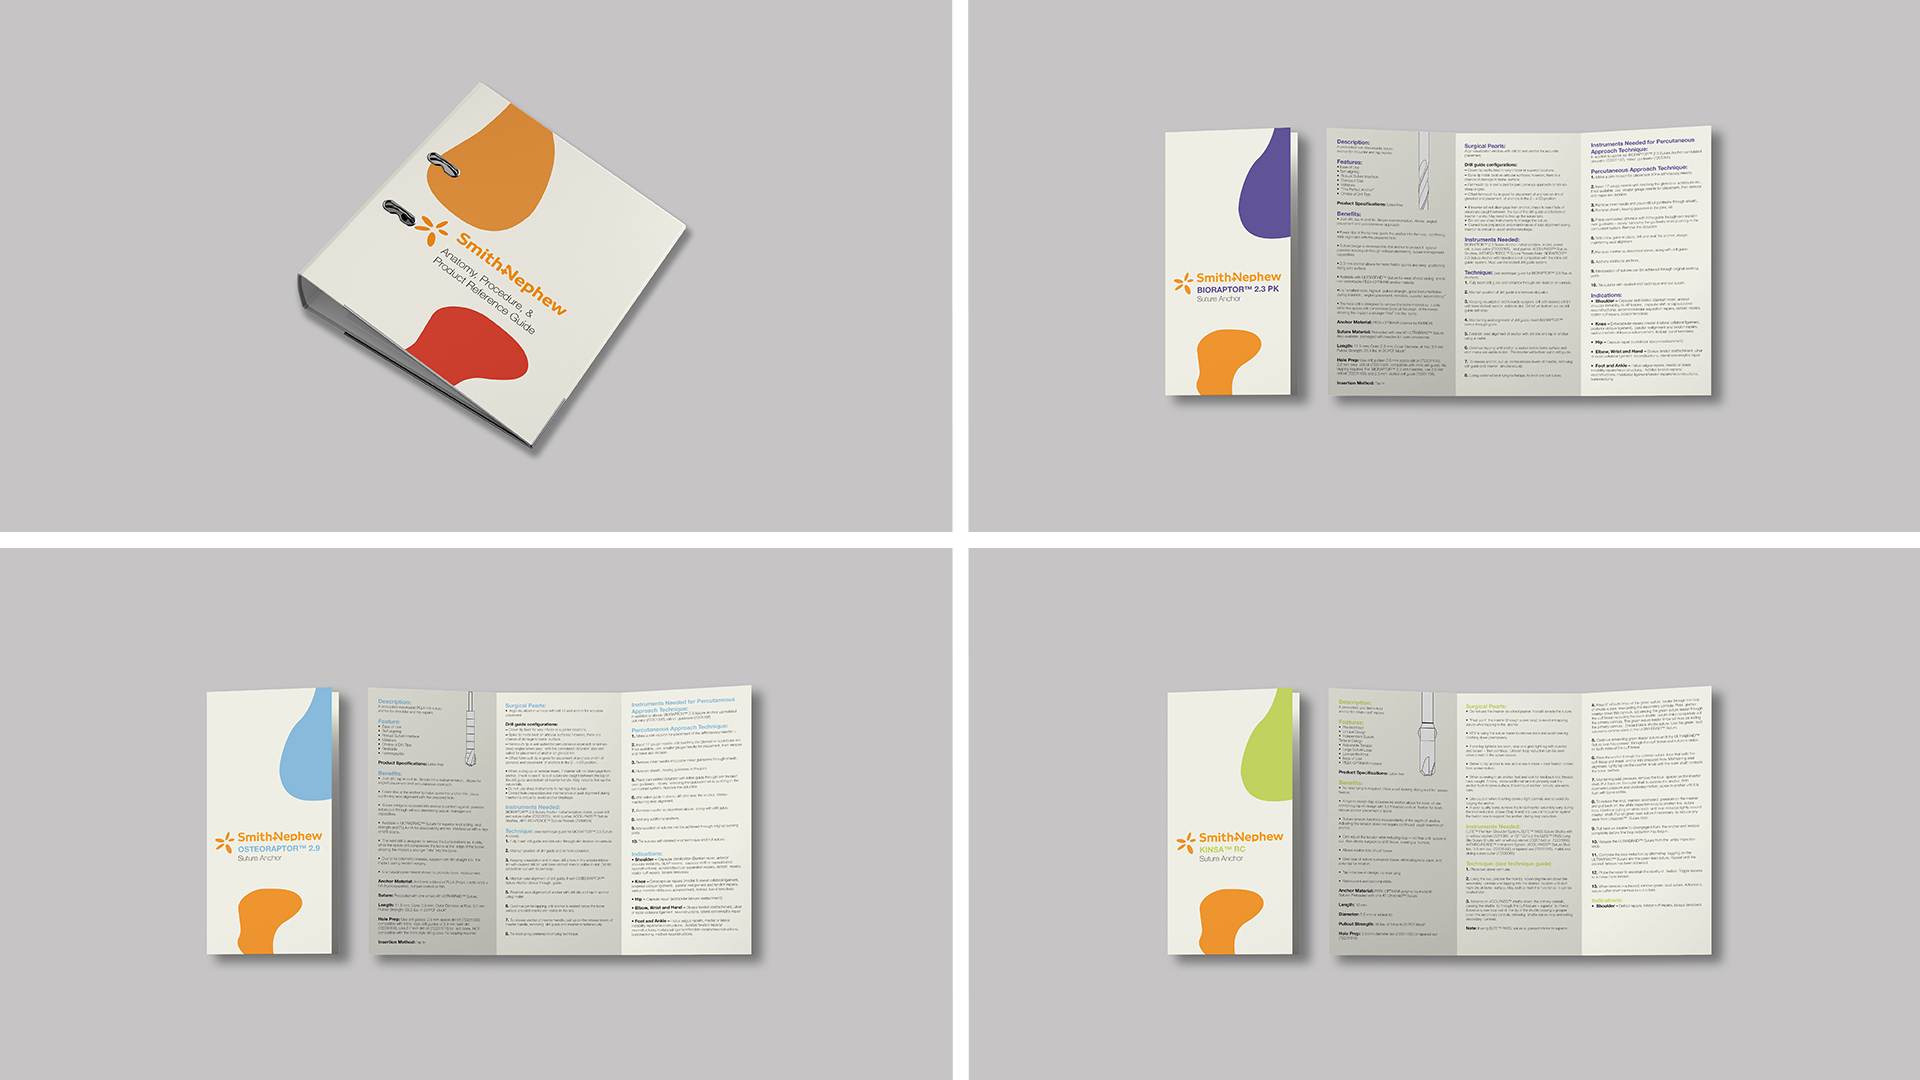 Smith and Nephew / “Smith and Nephew,” binder and brochure design, 8.5 x 11 inches product, 2021. This design introduces a redesign using Smith and Nephew’s original color palette.